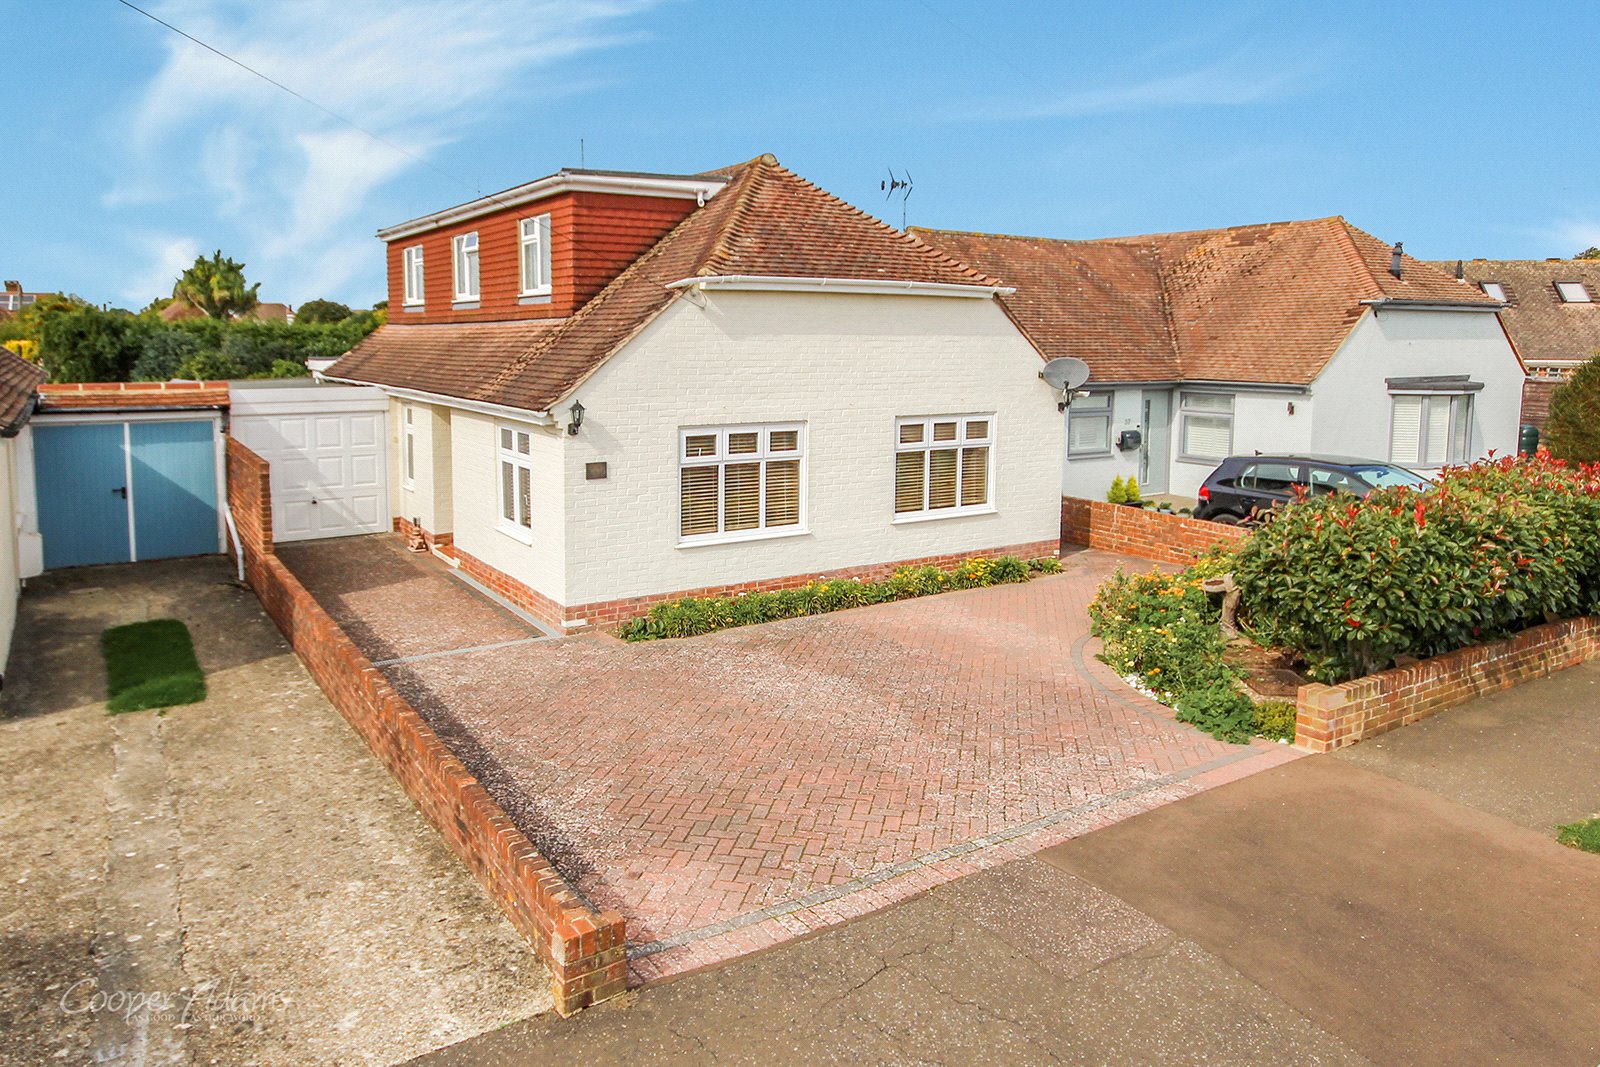 3 bed house for sale in Normandy Lane, East Preston  - Property Image 1